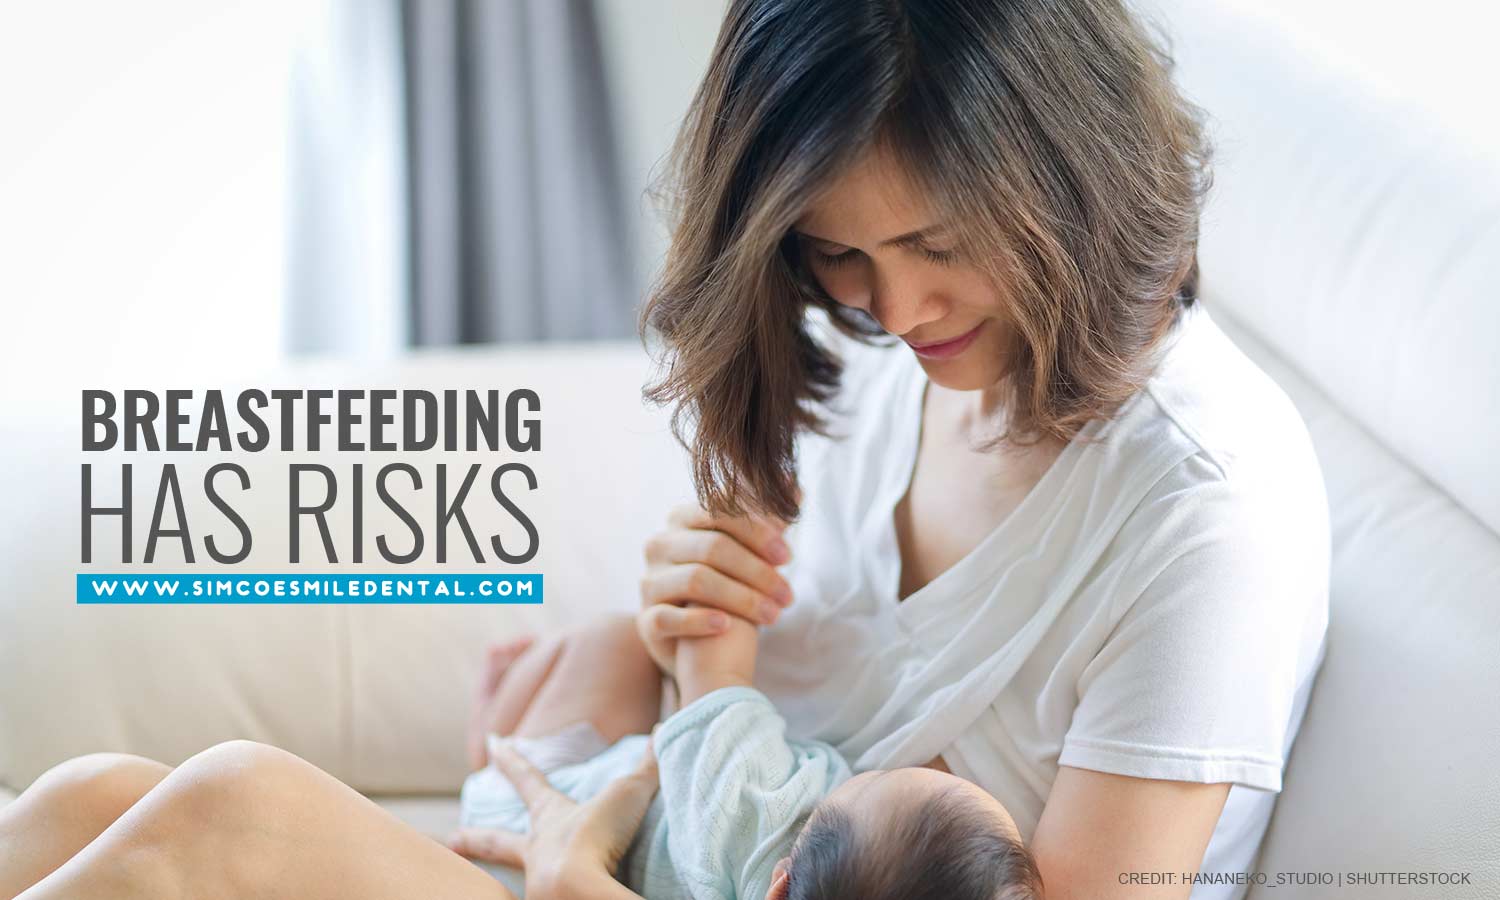 Use breastfeeding to teach your baby good swallow patterns early